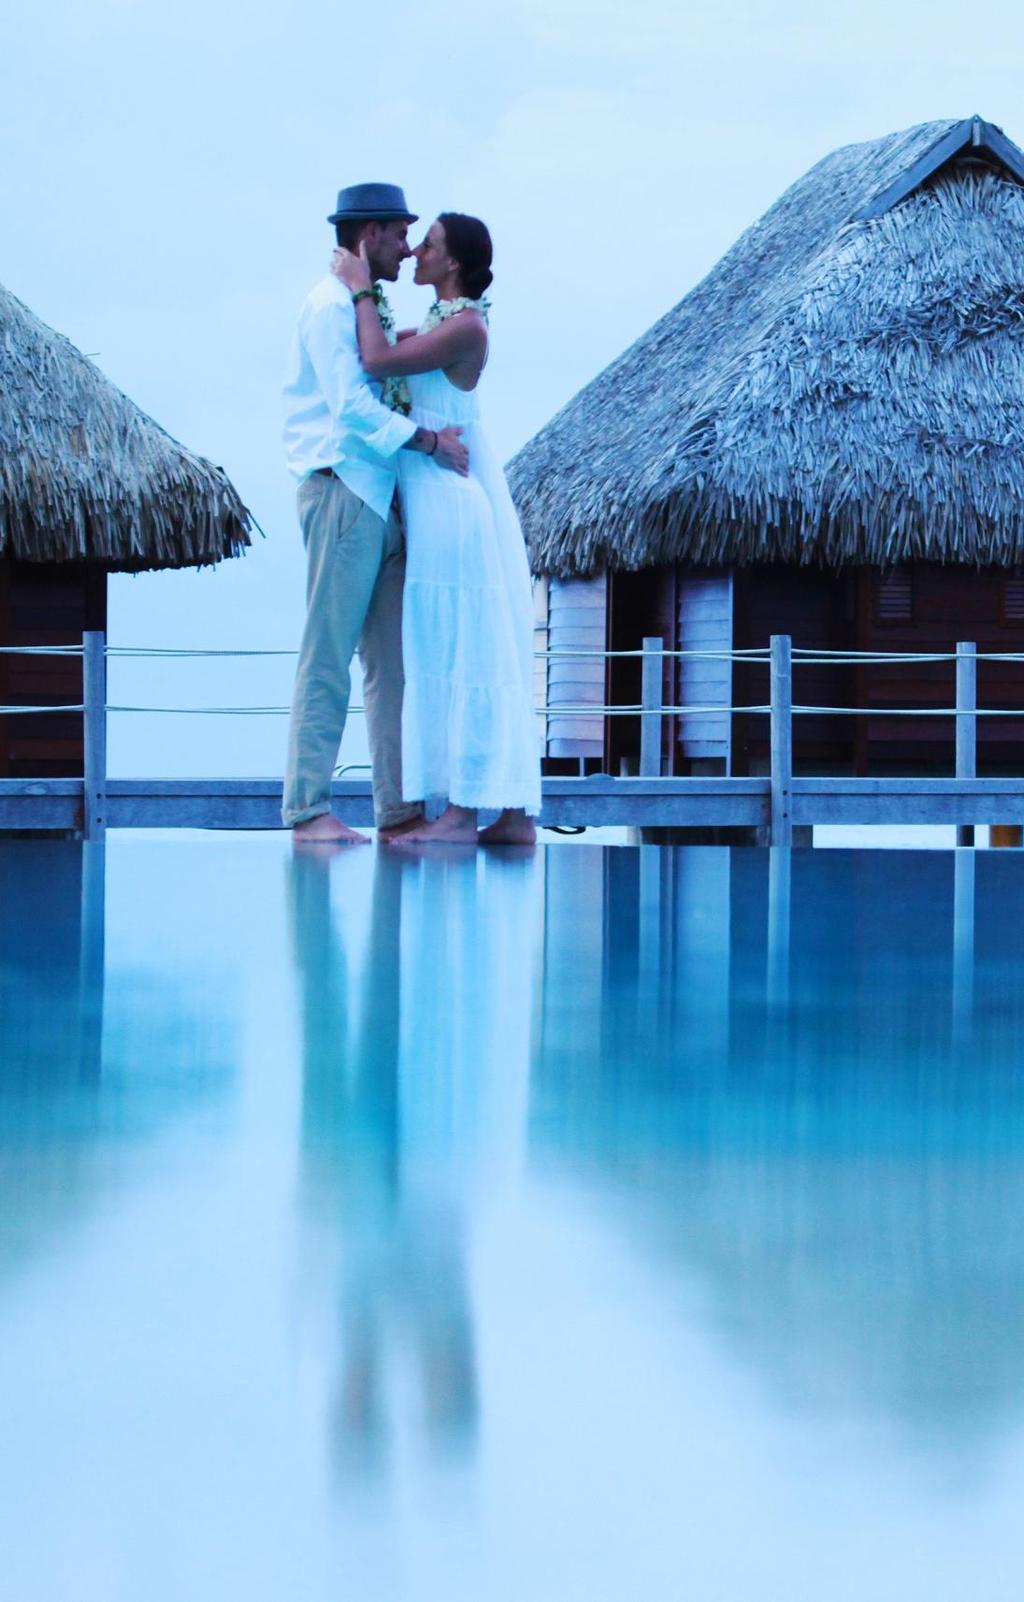 WEDDINGS & HONEYMOONS Between the dramatic lush green mountains and the turquoise blue lagoon, lies Manava Beach Resort & Spa-Moorea: the perfect spot to say "I do".